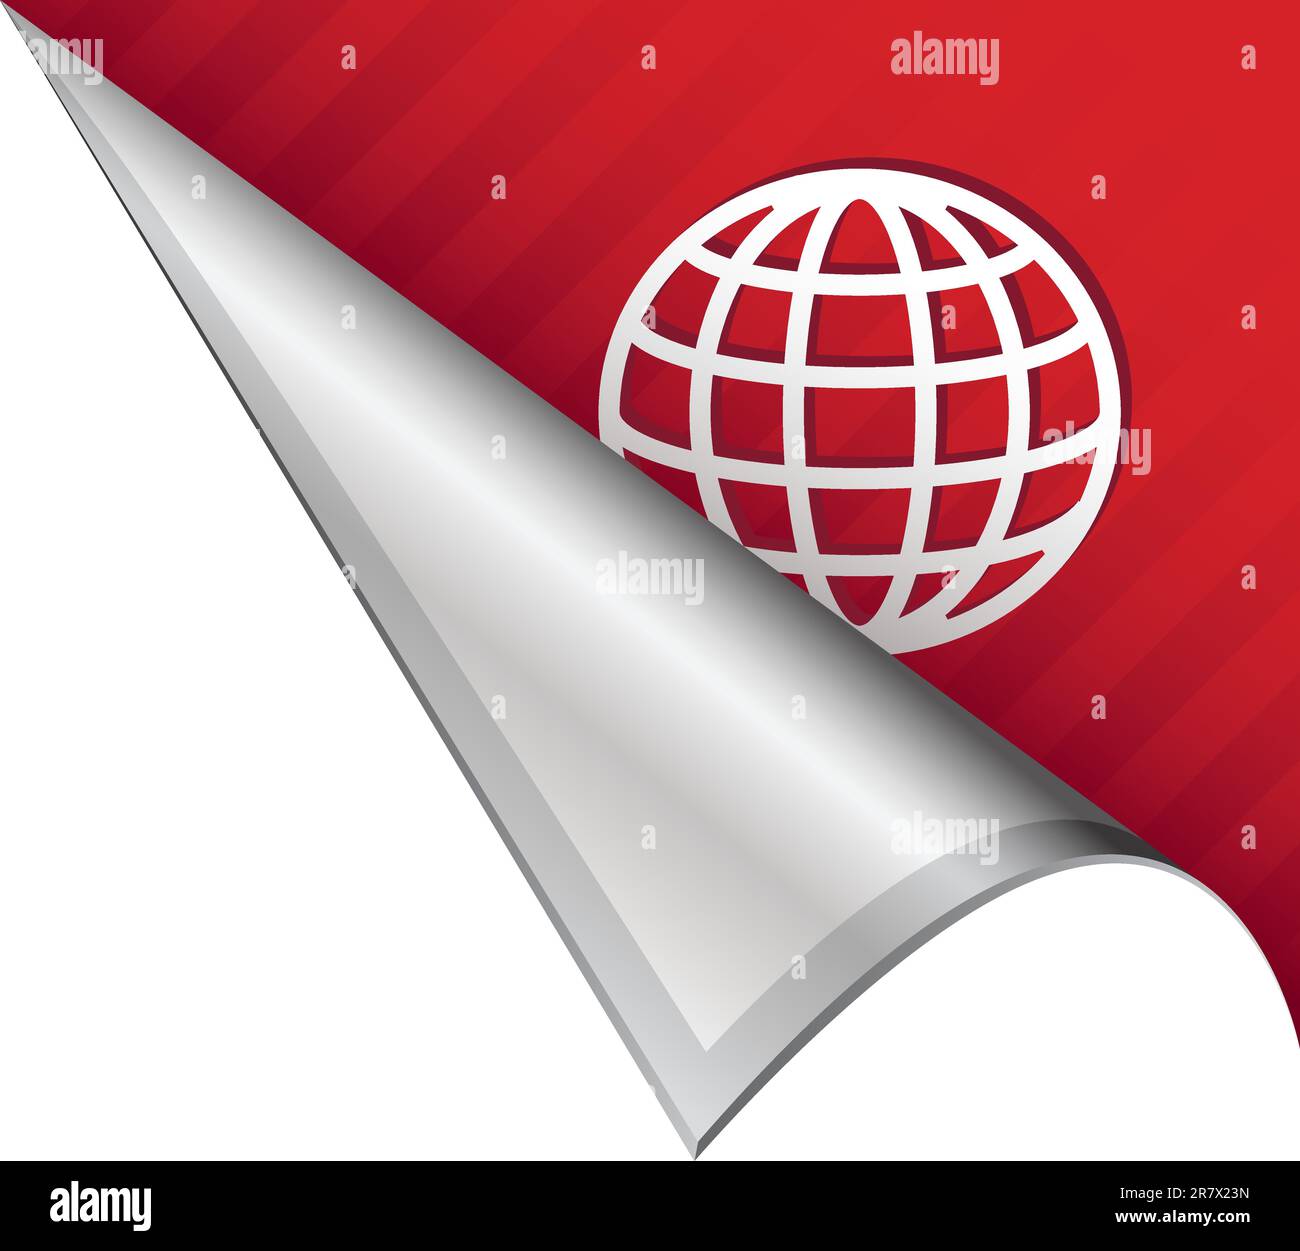 Globe or international icon on vector peeled corner tab suitable for use in print, on websites, or in advertising materials. Stock Vector